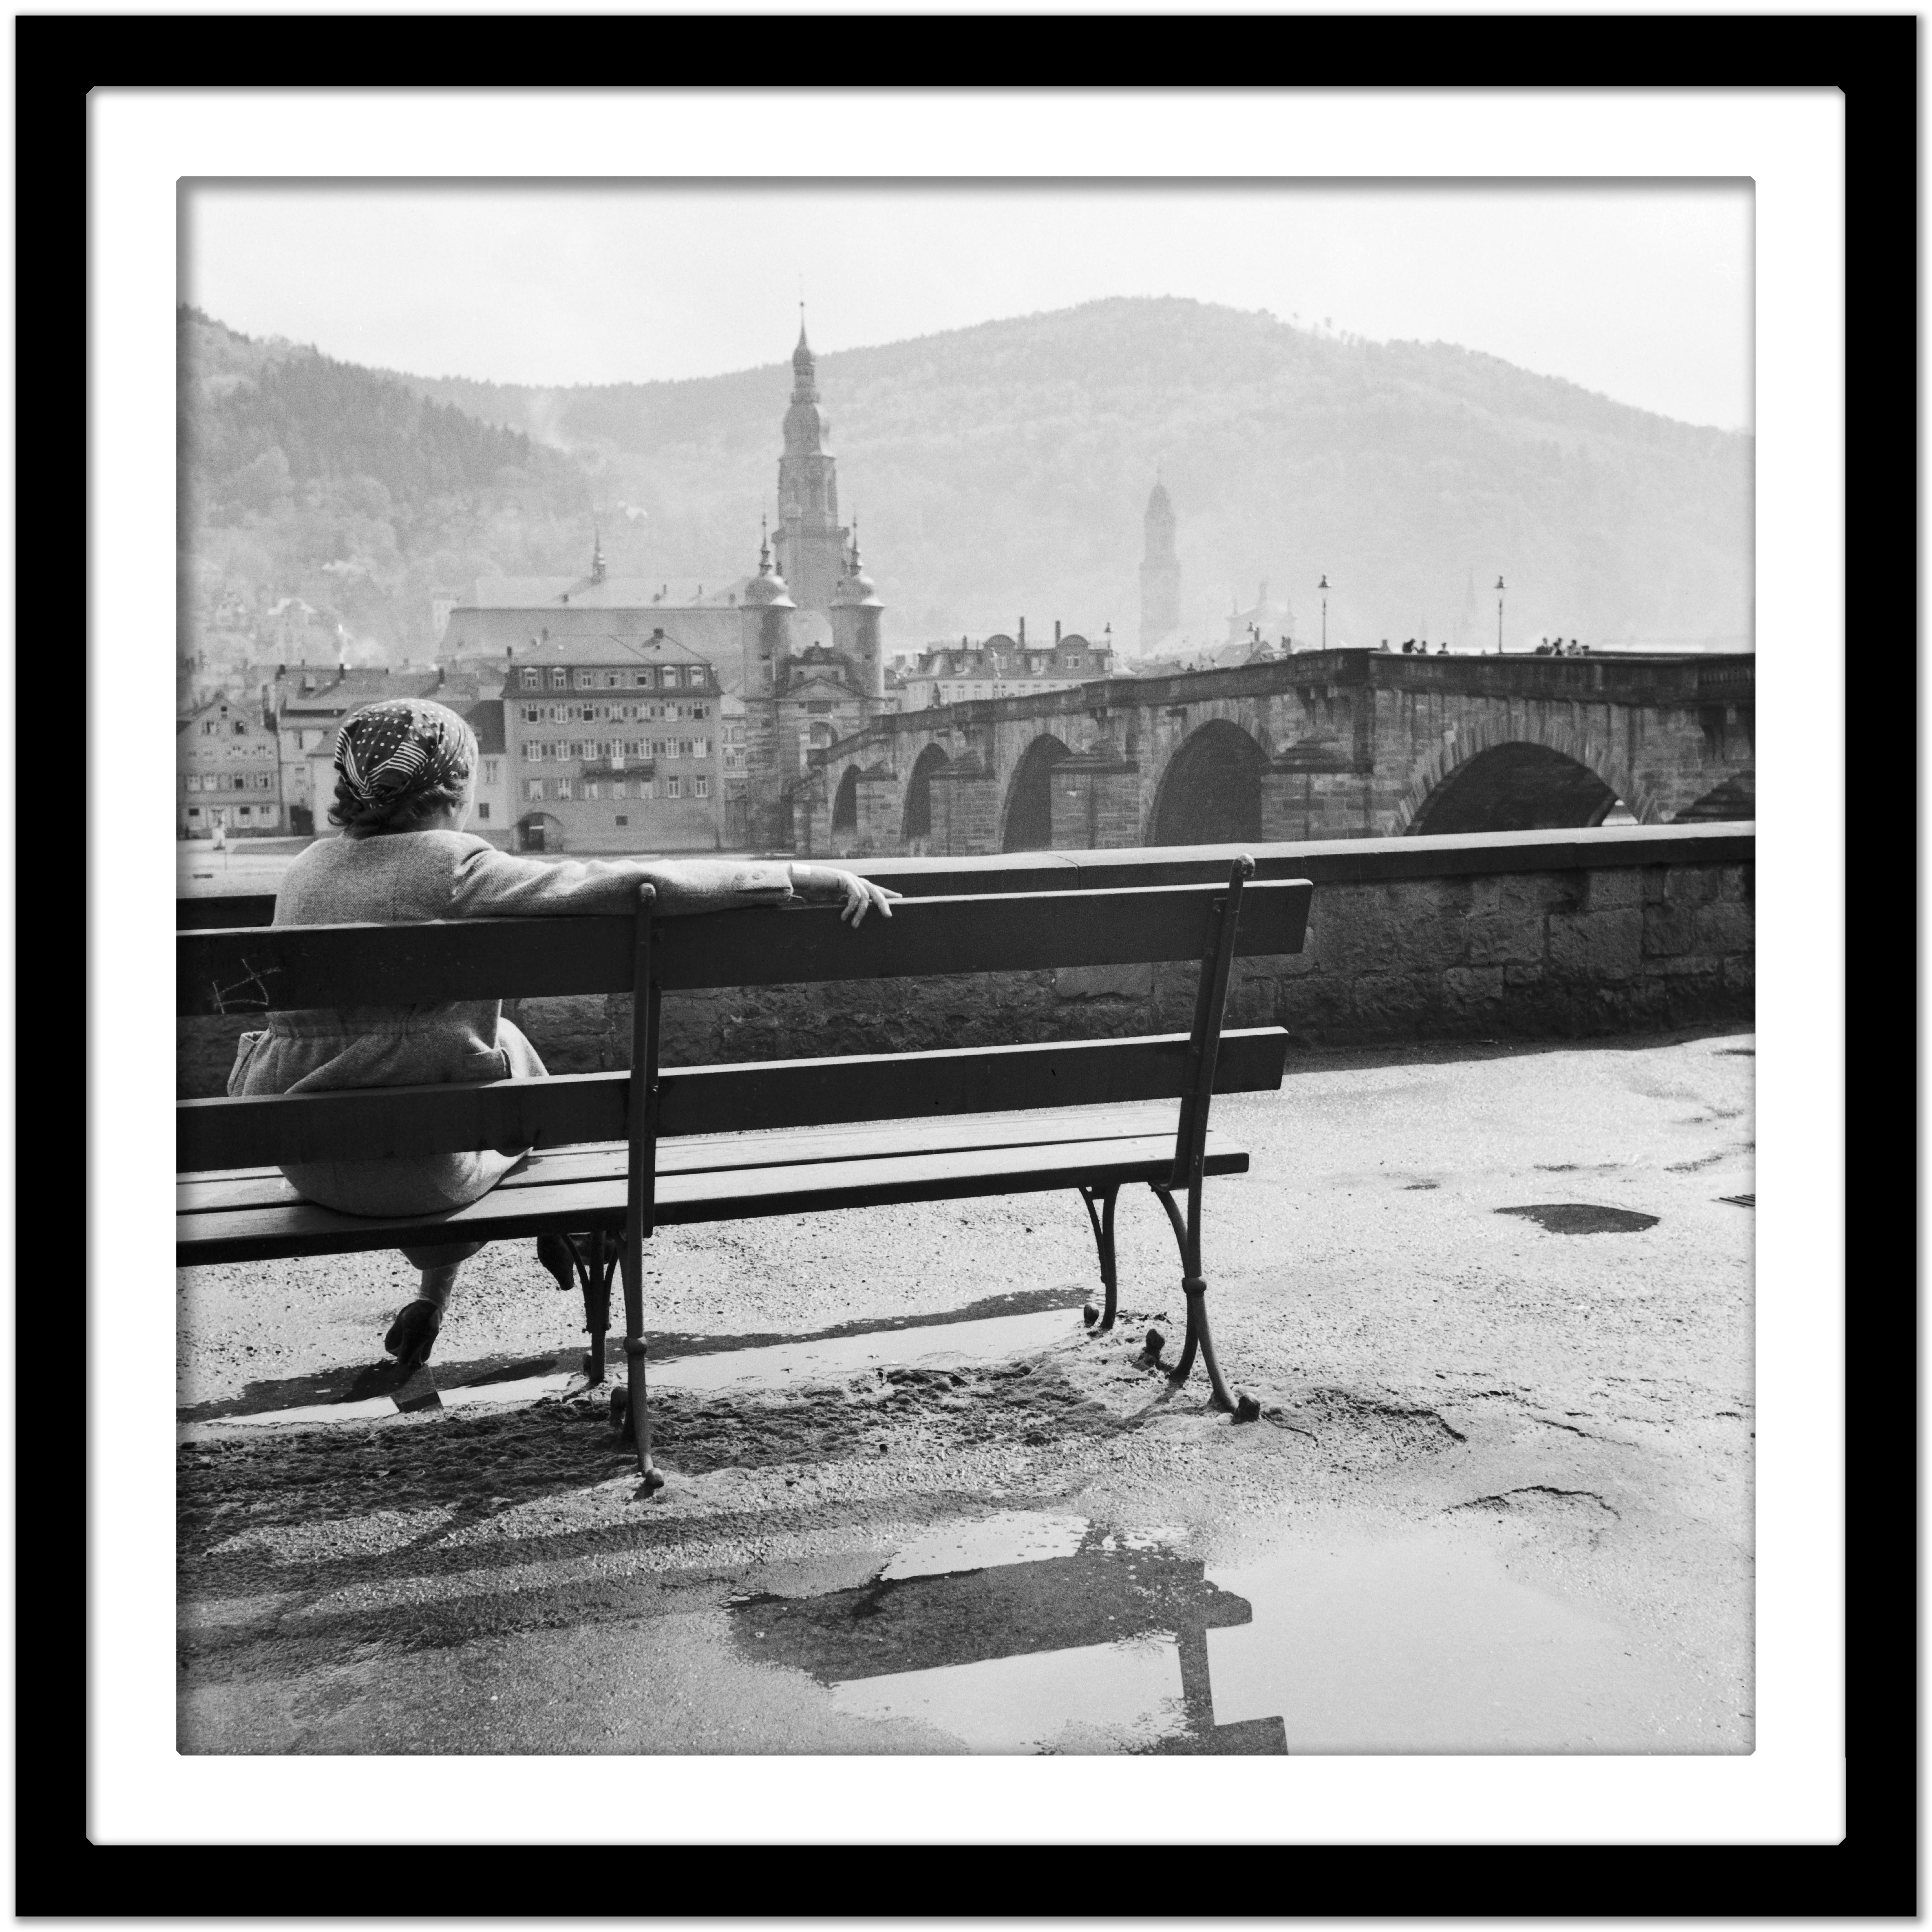 Woman sitting at Neckar on bench Heidelberg, Germany 1936, Printed Later  - Gray Black and White Photograph by Karl Heinrich Lämmel